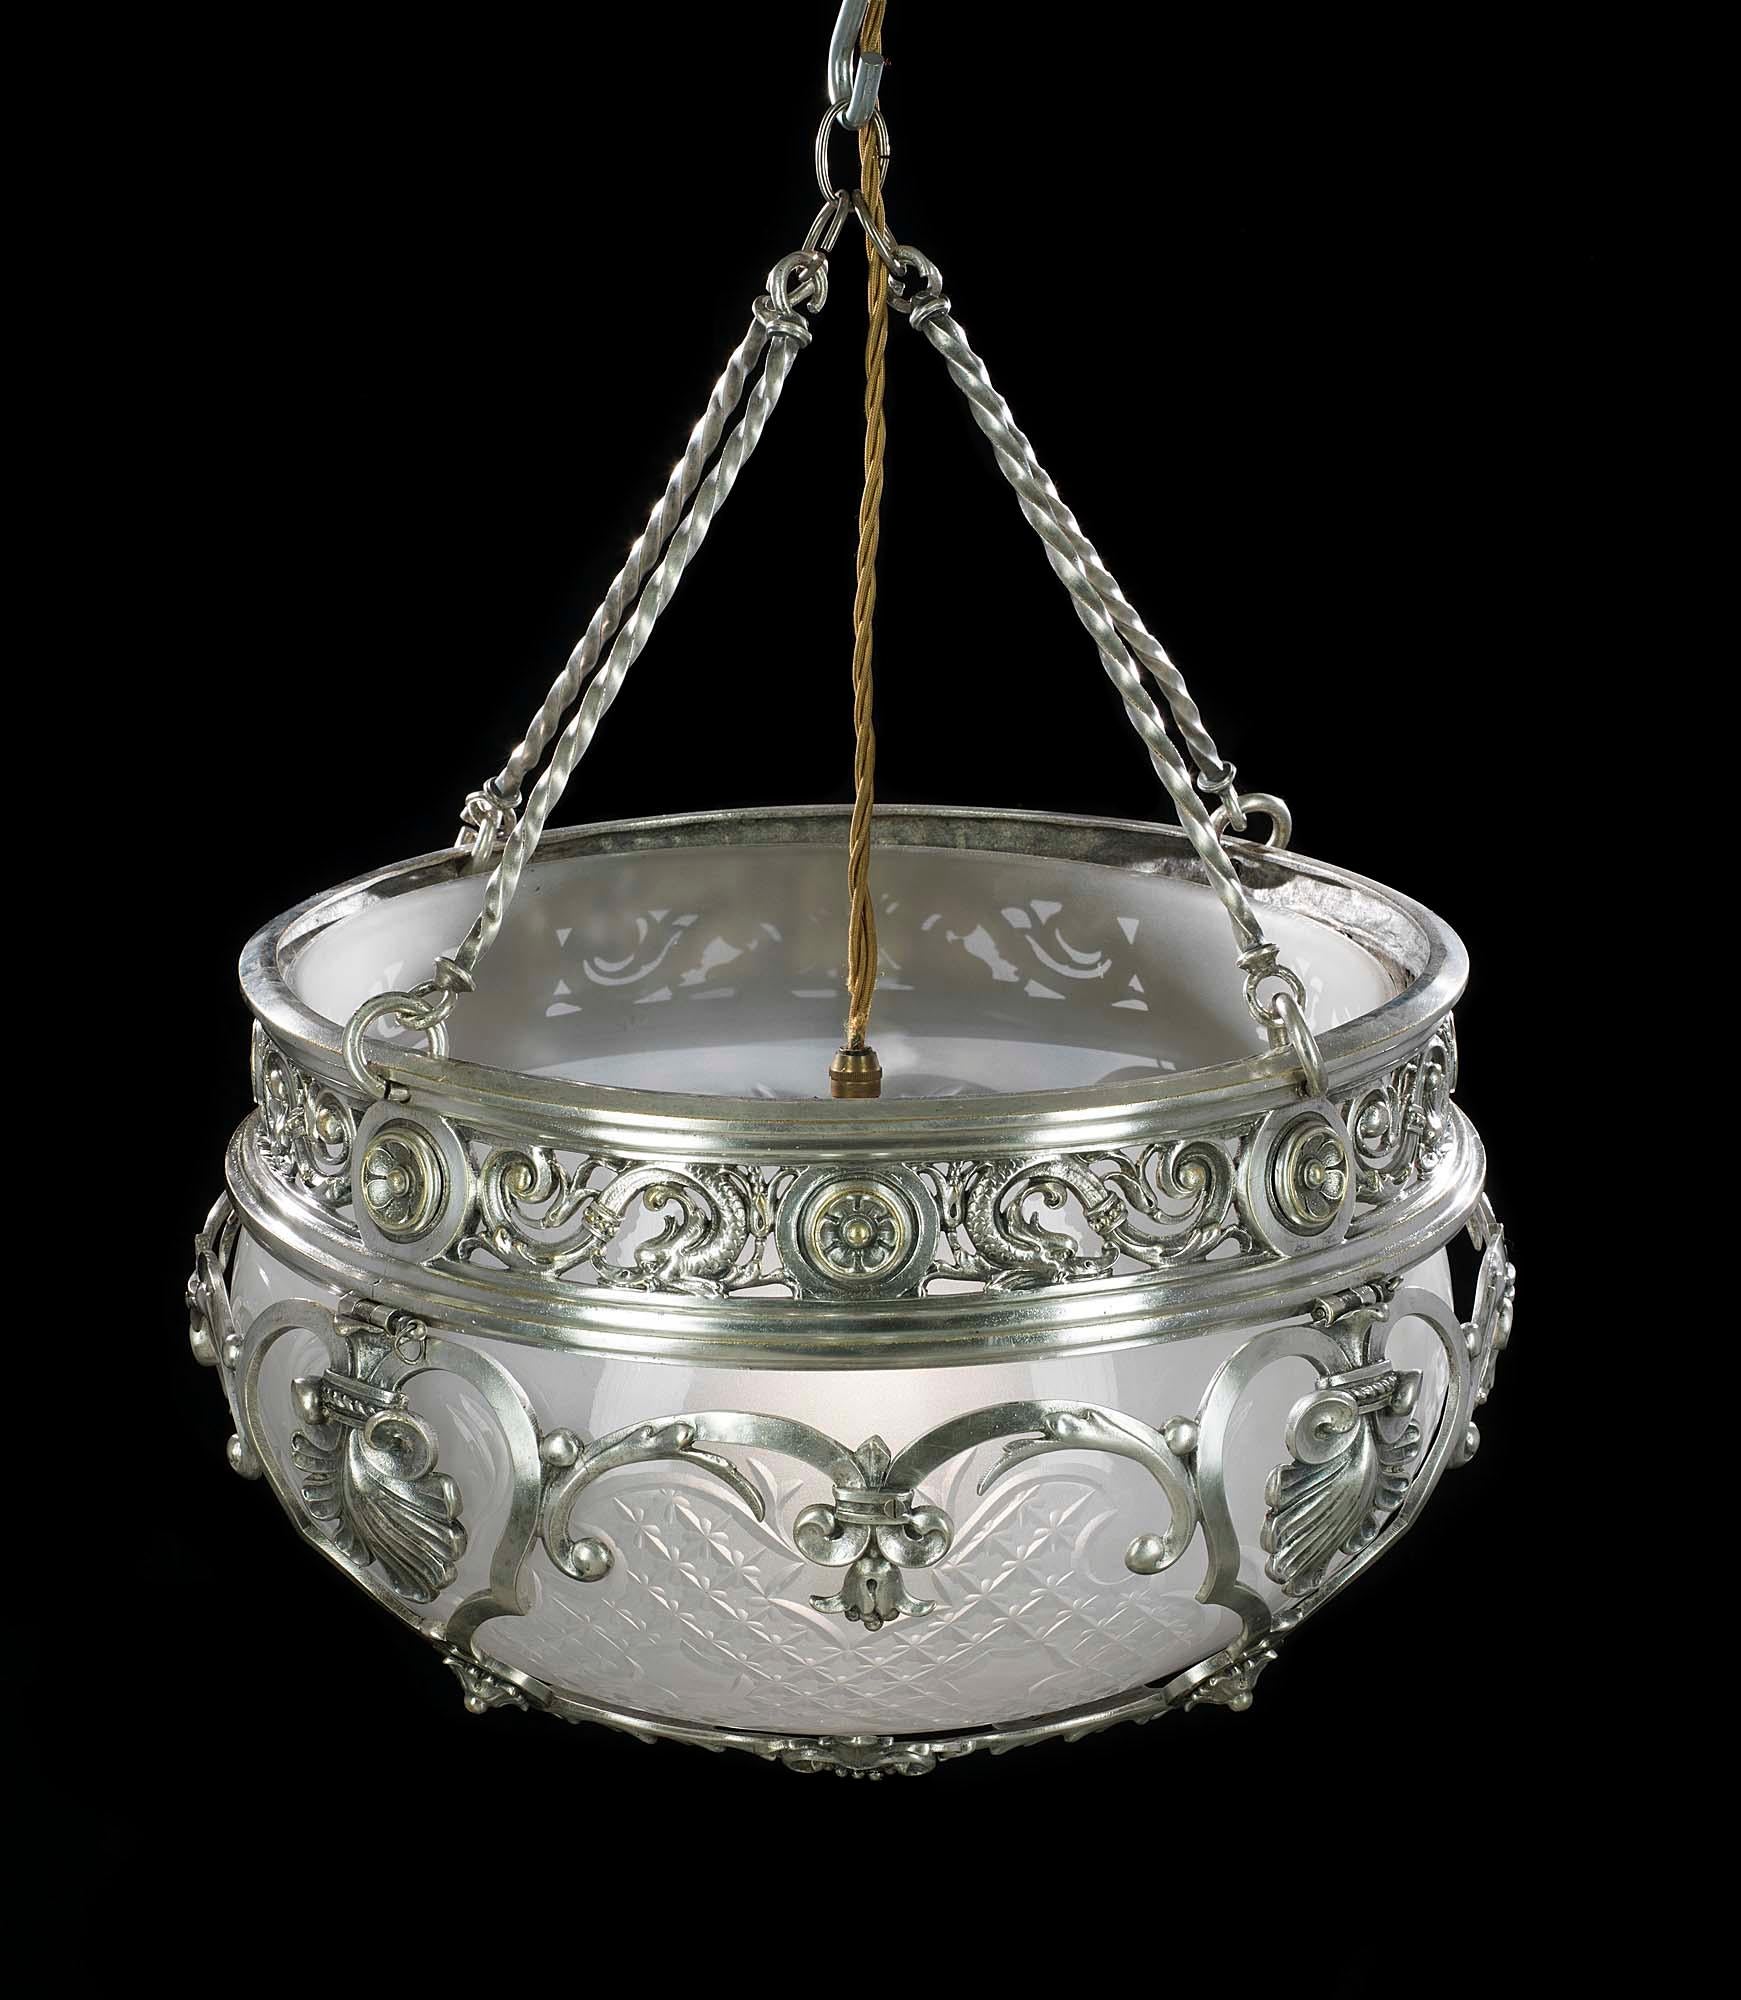 A large and beautifully made late Edwardian silver plated brass ceiling light suspended from four rigid barley twist chains. The cut and frosted glass bowl is held within a highly ornate frame of scrolling tendrils, bellflowers, rosettes and reverse